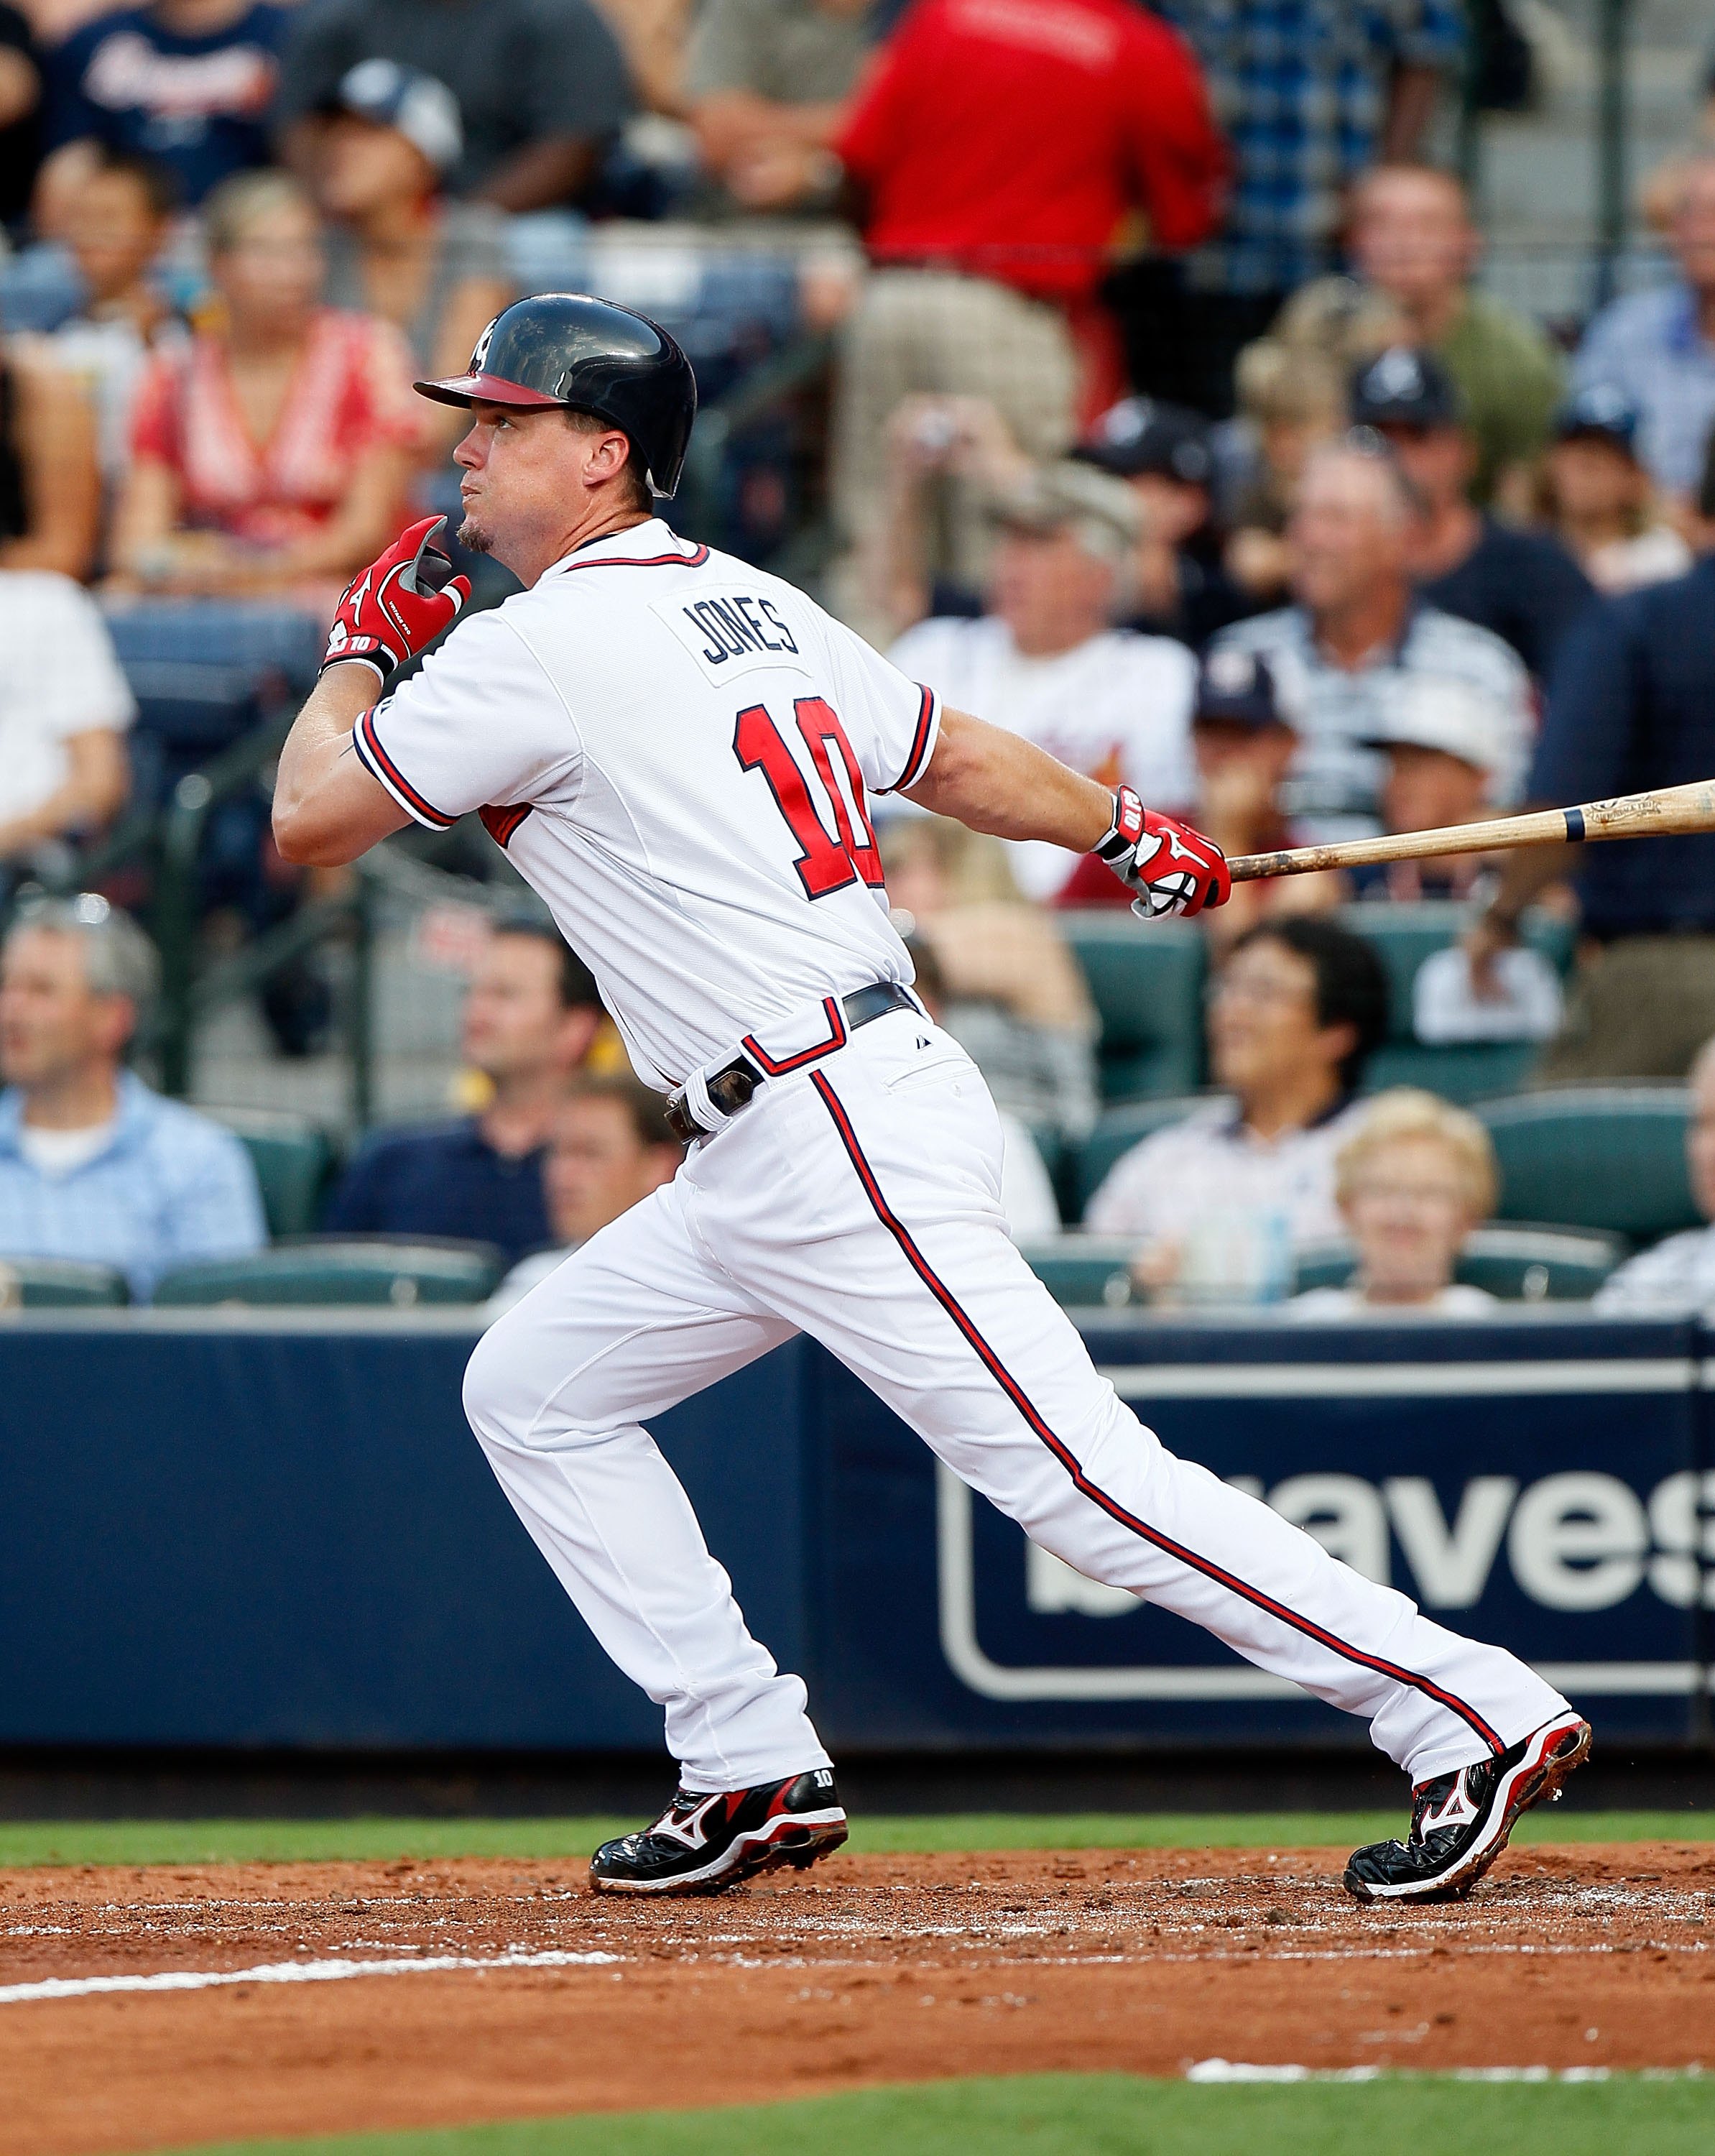 Chipper joins Braves great Eddie Mathews in Hall of Fame